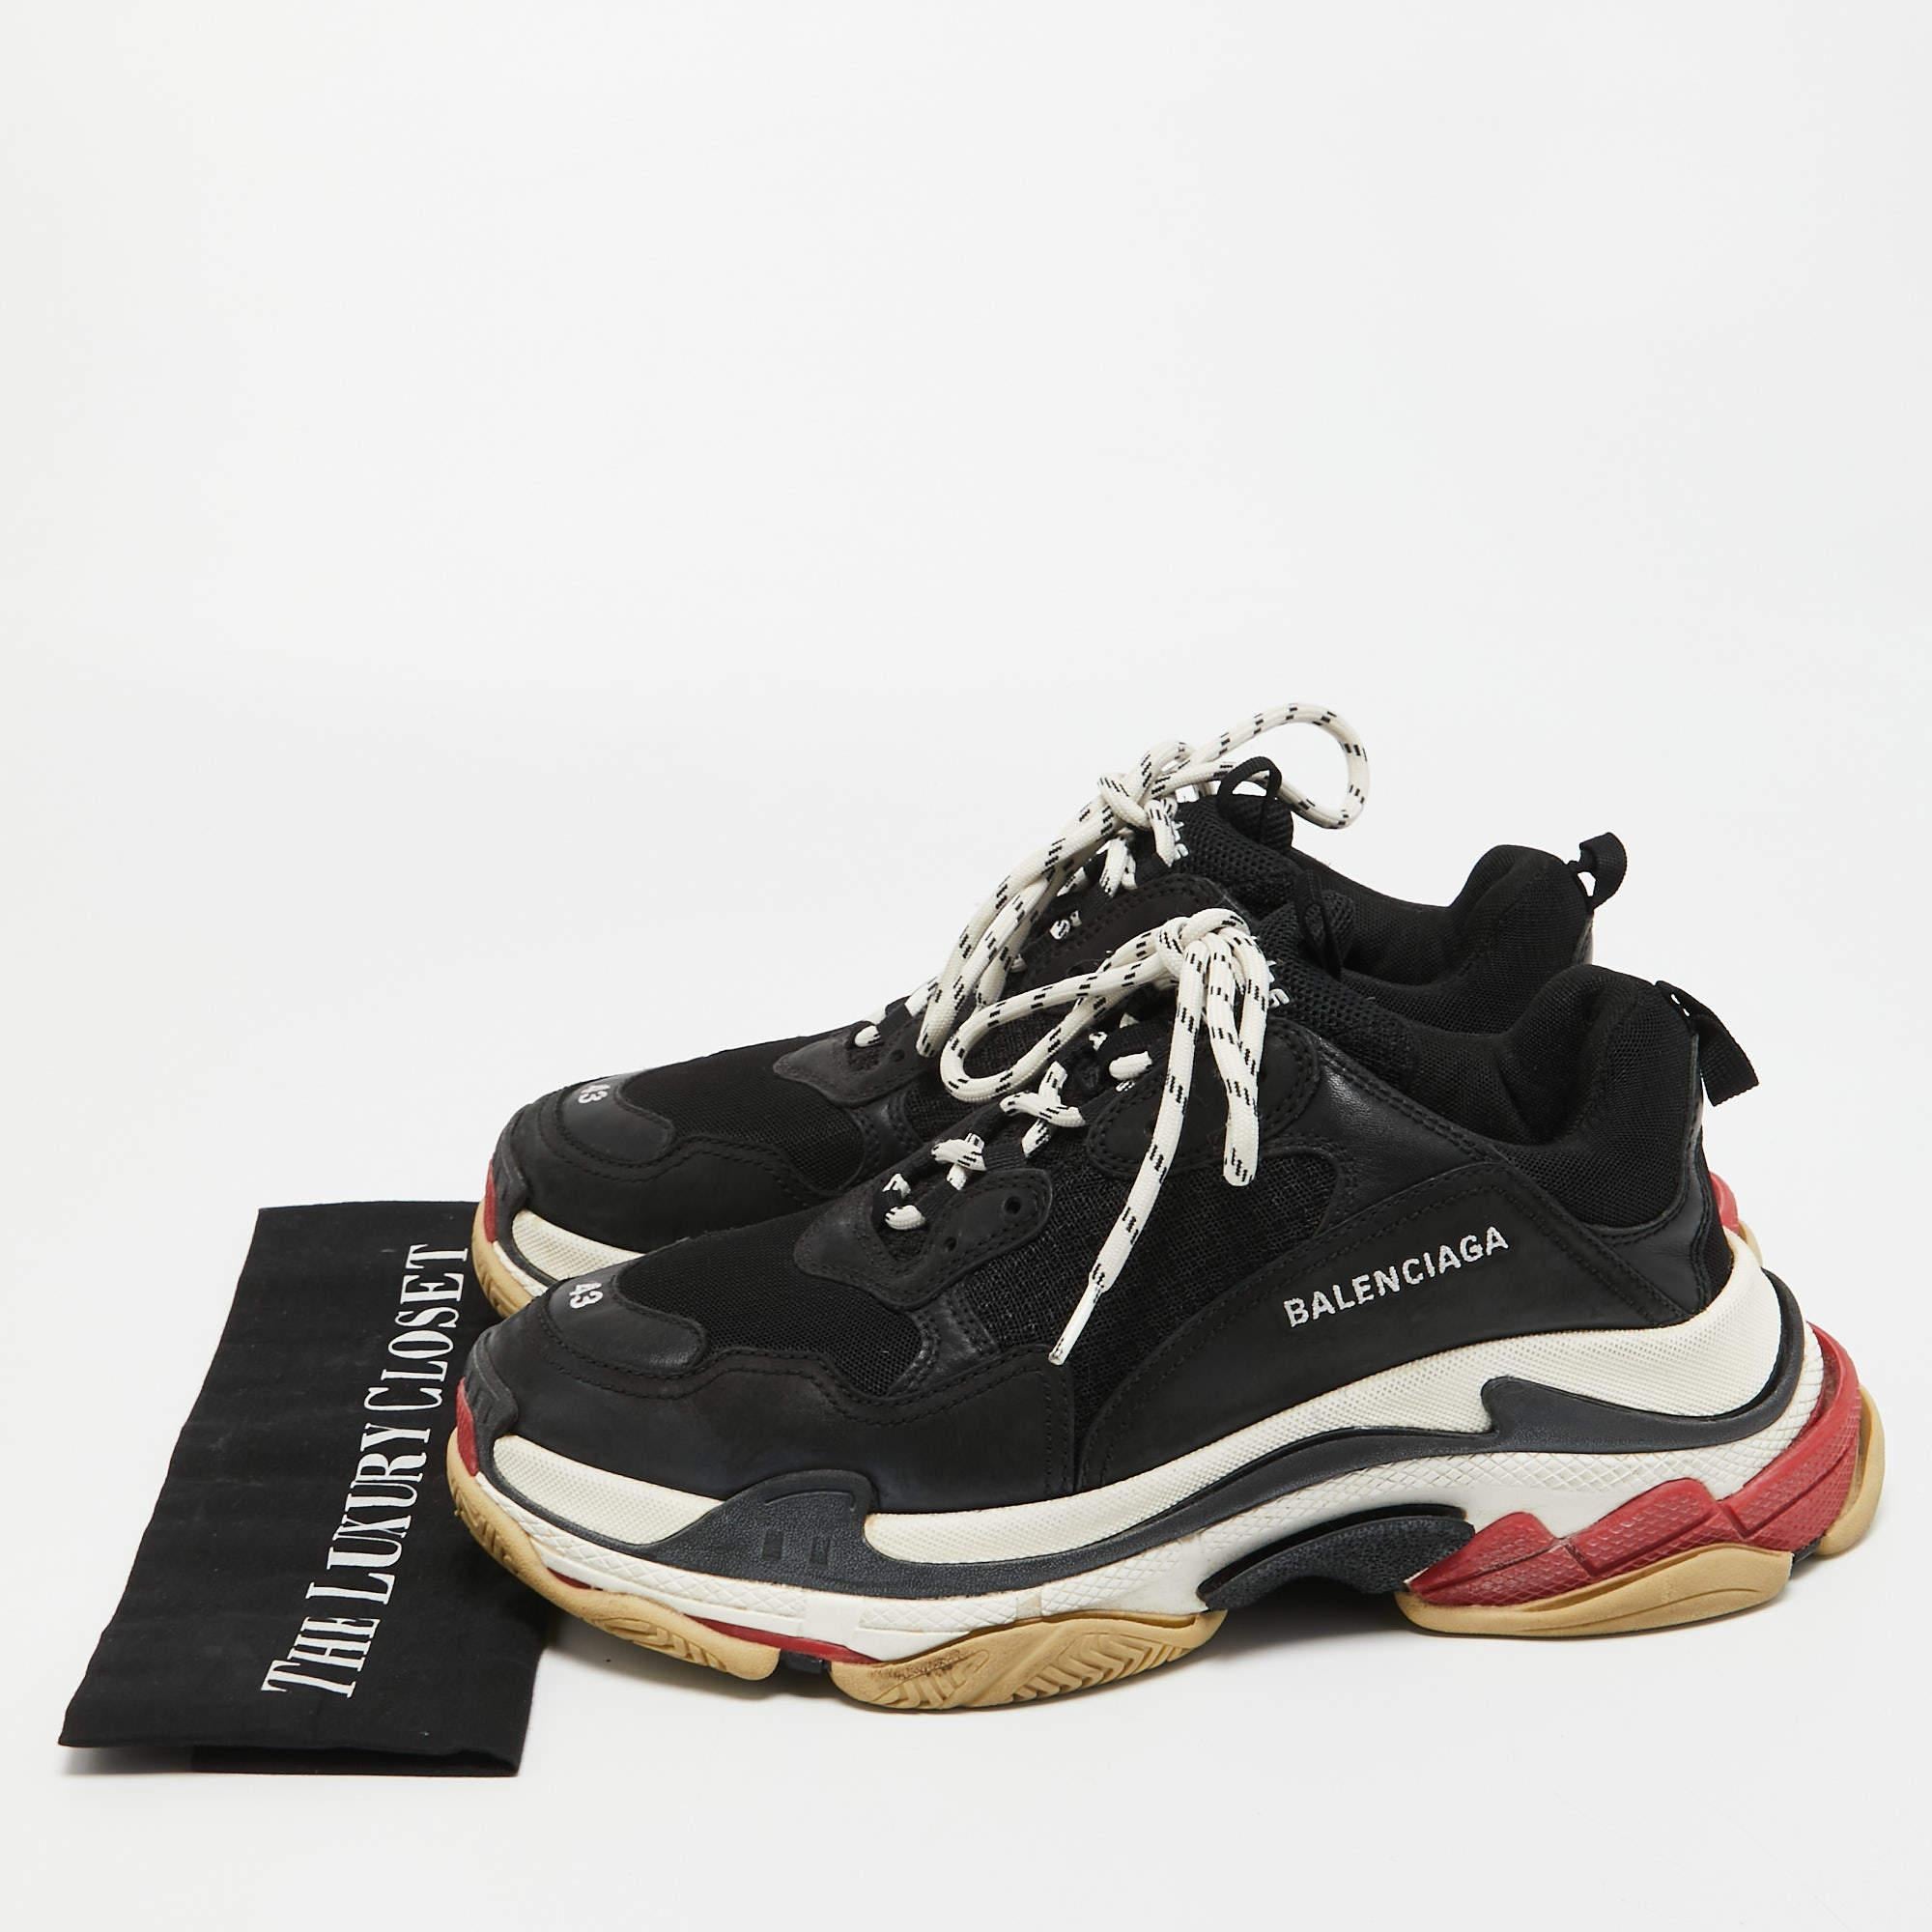 Balenciaga Black Leather and Mesh Triple S Sneakers Size 43 5